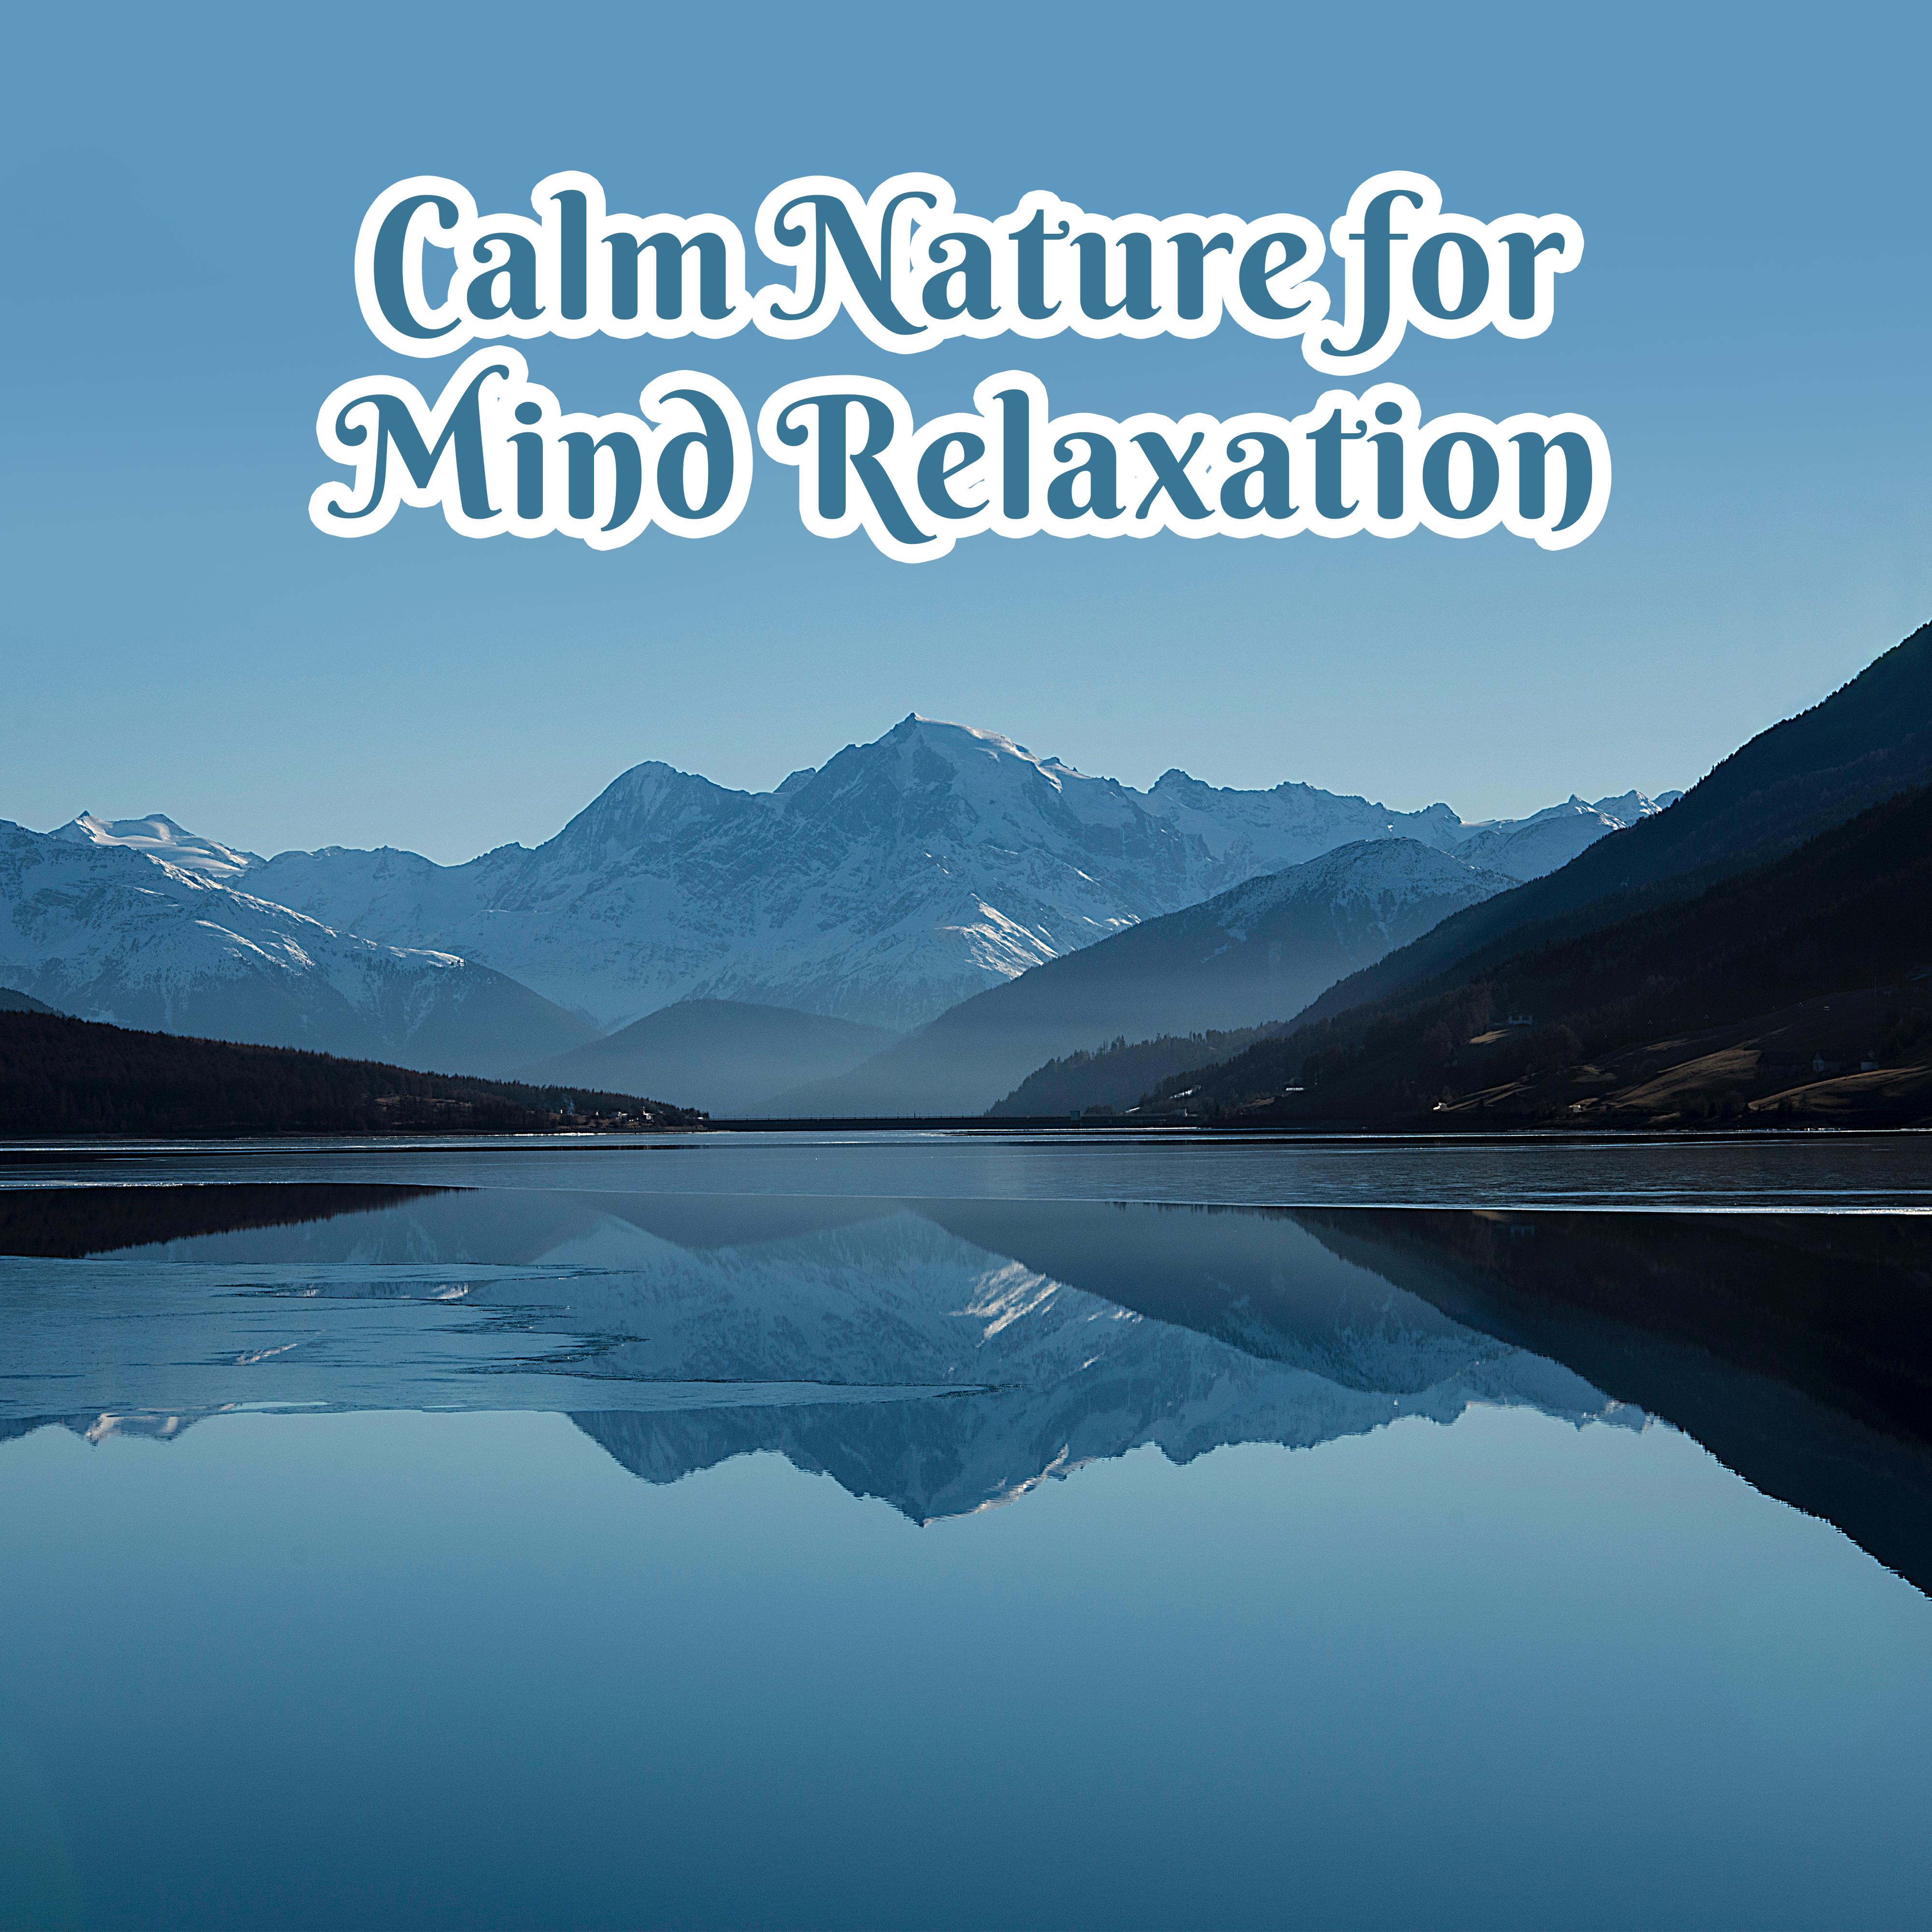 Calm Nature for Mind Relaxation